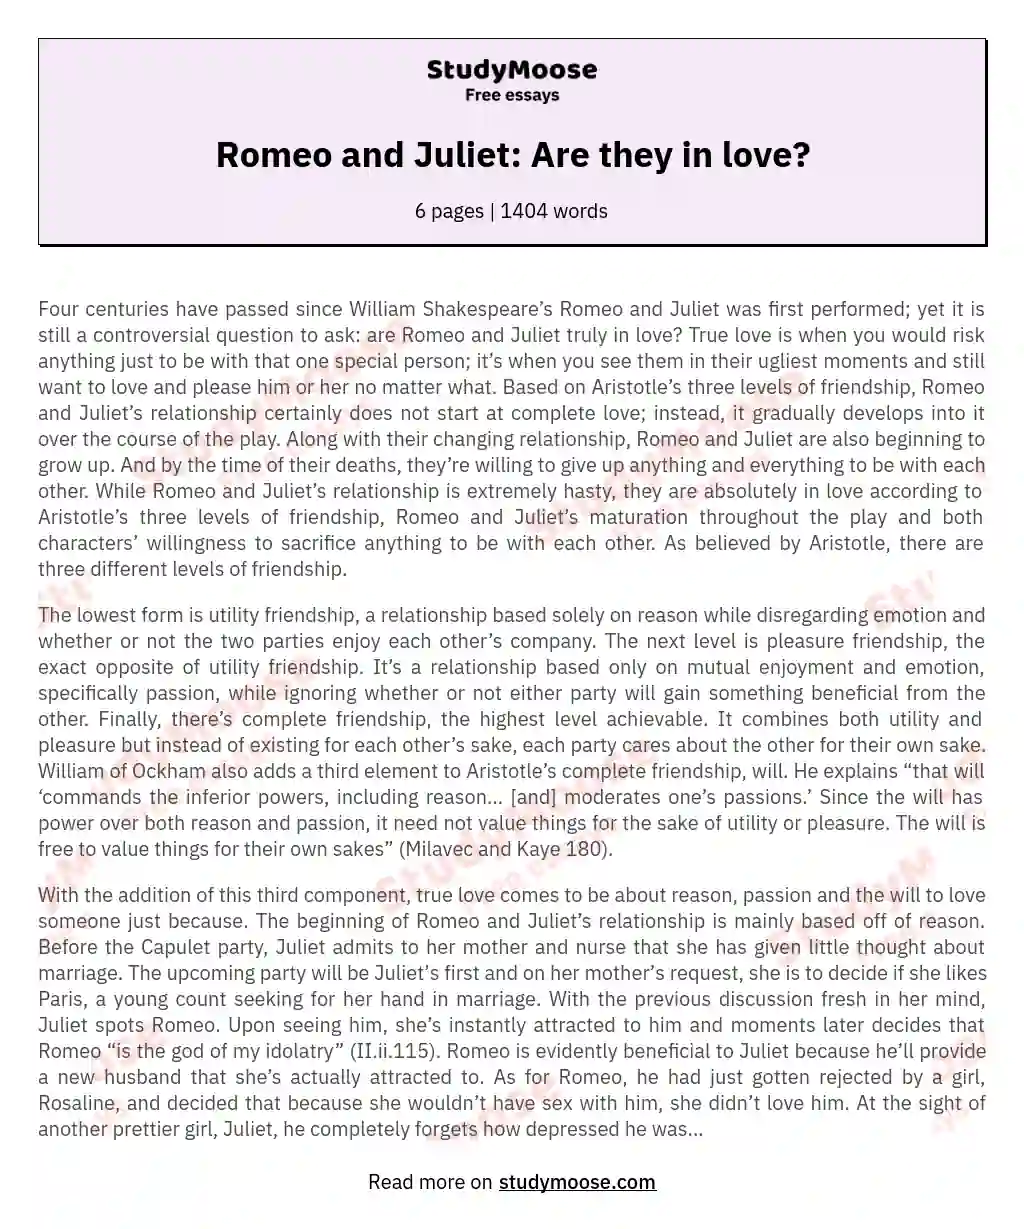 Romeo and Juliet: Are they in love? essay